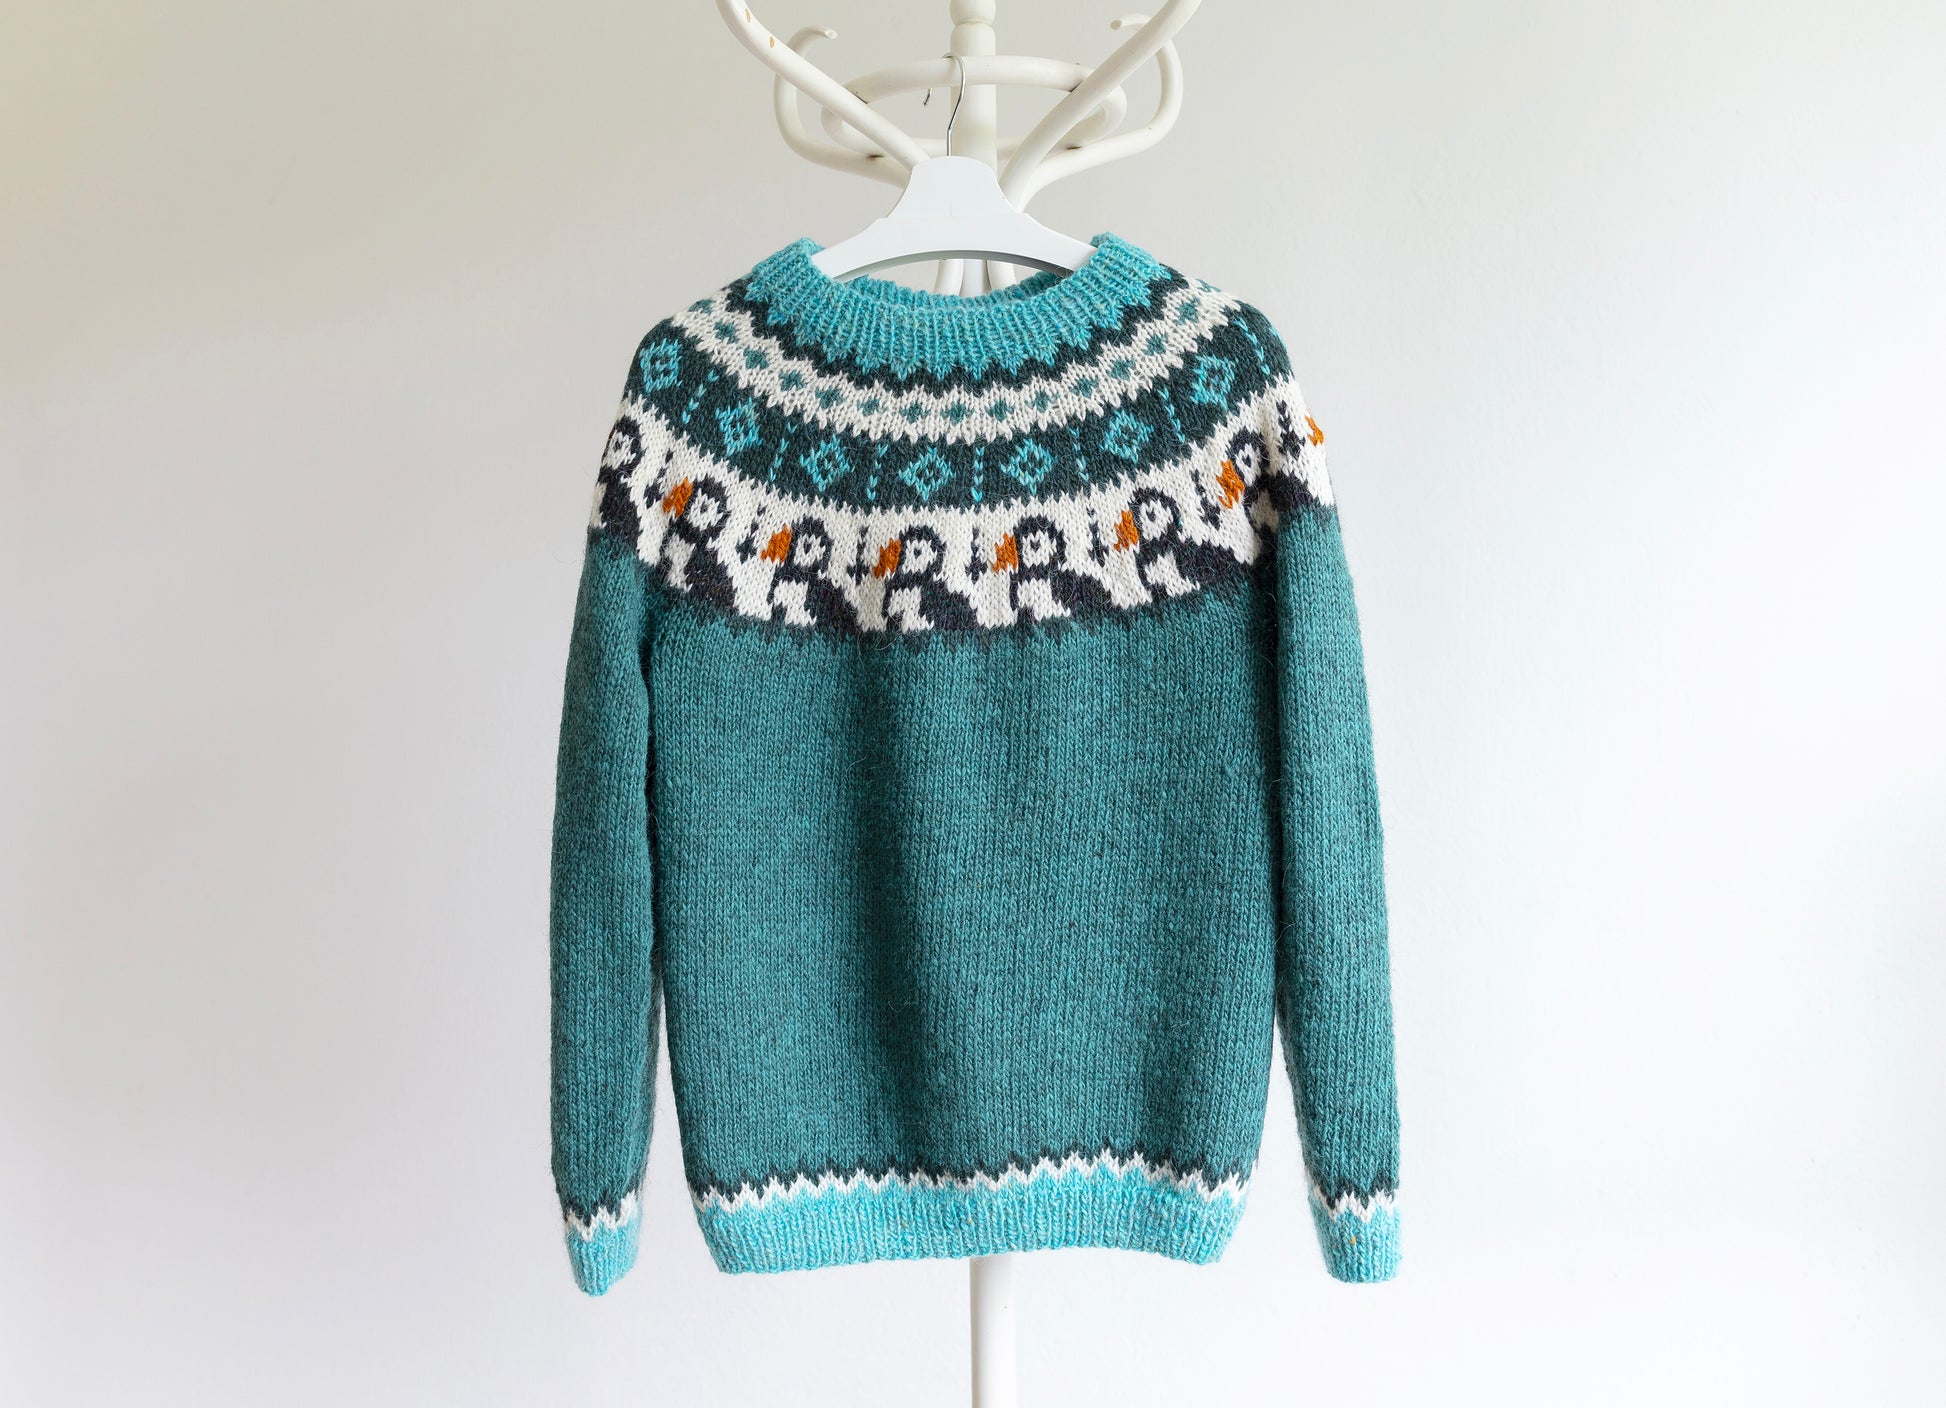 Turquoise and white knitted Icelandic lopapeysa sweater in Puffins knitting pattern